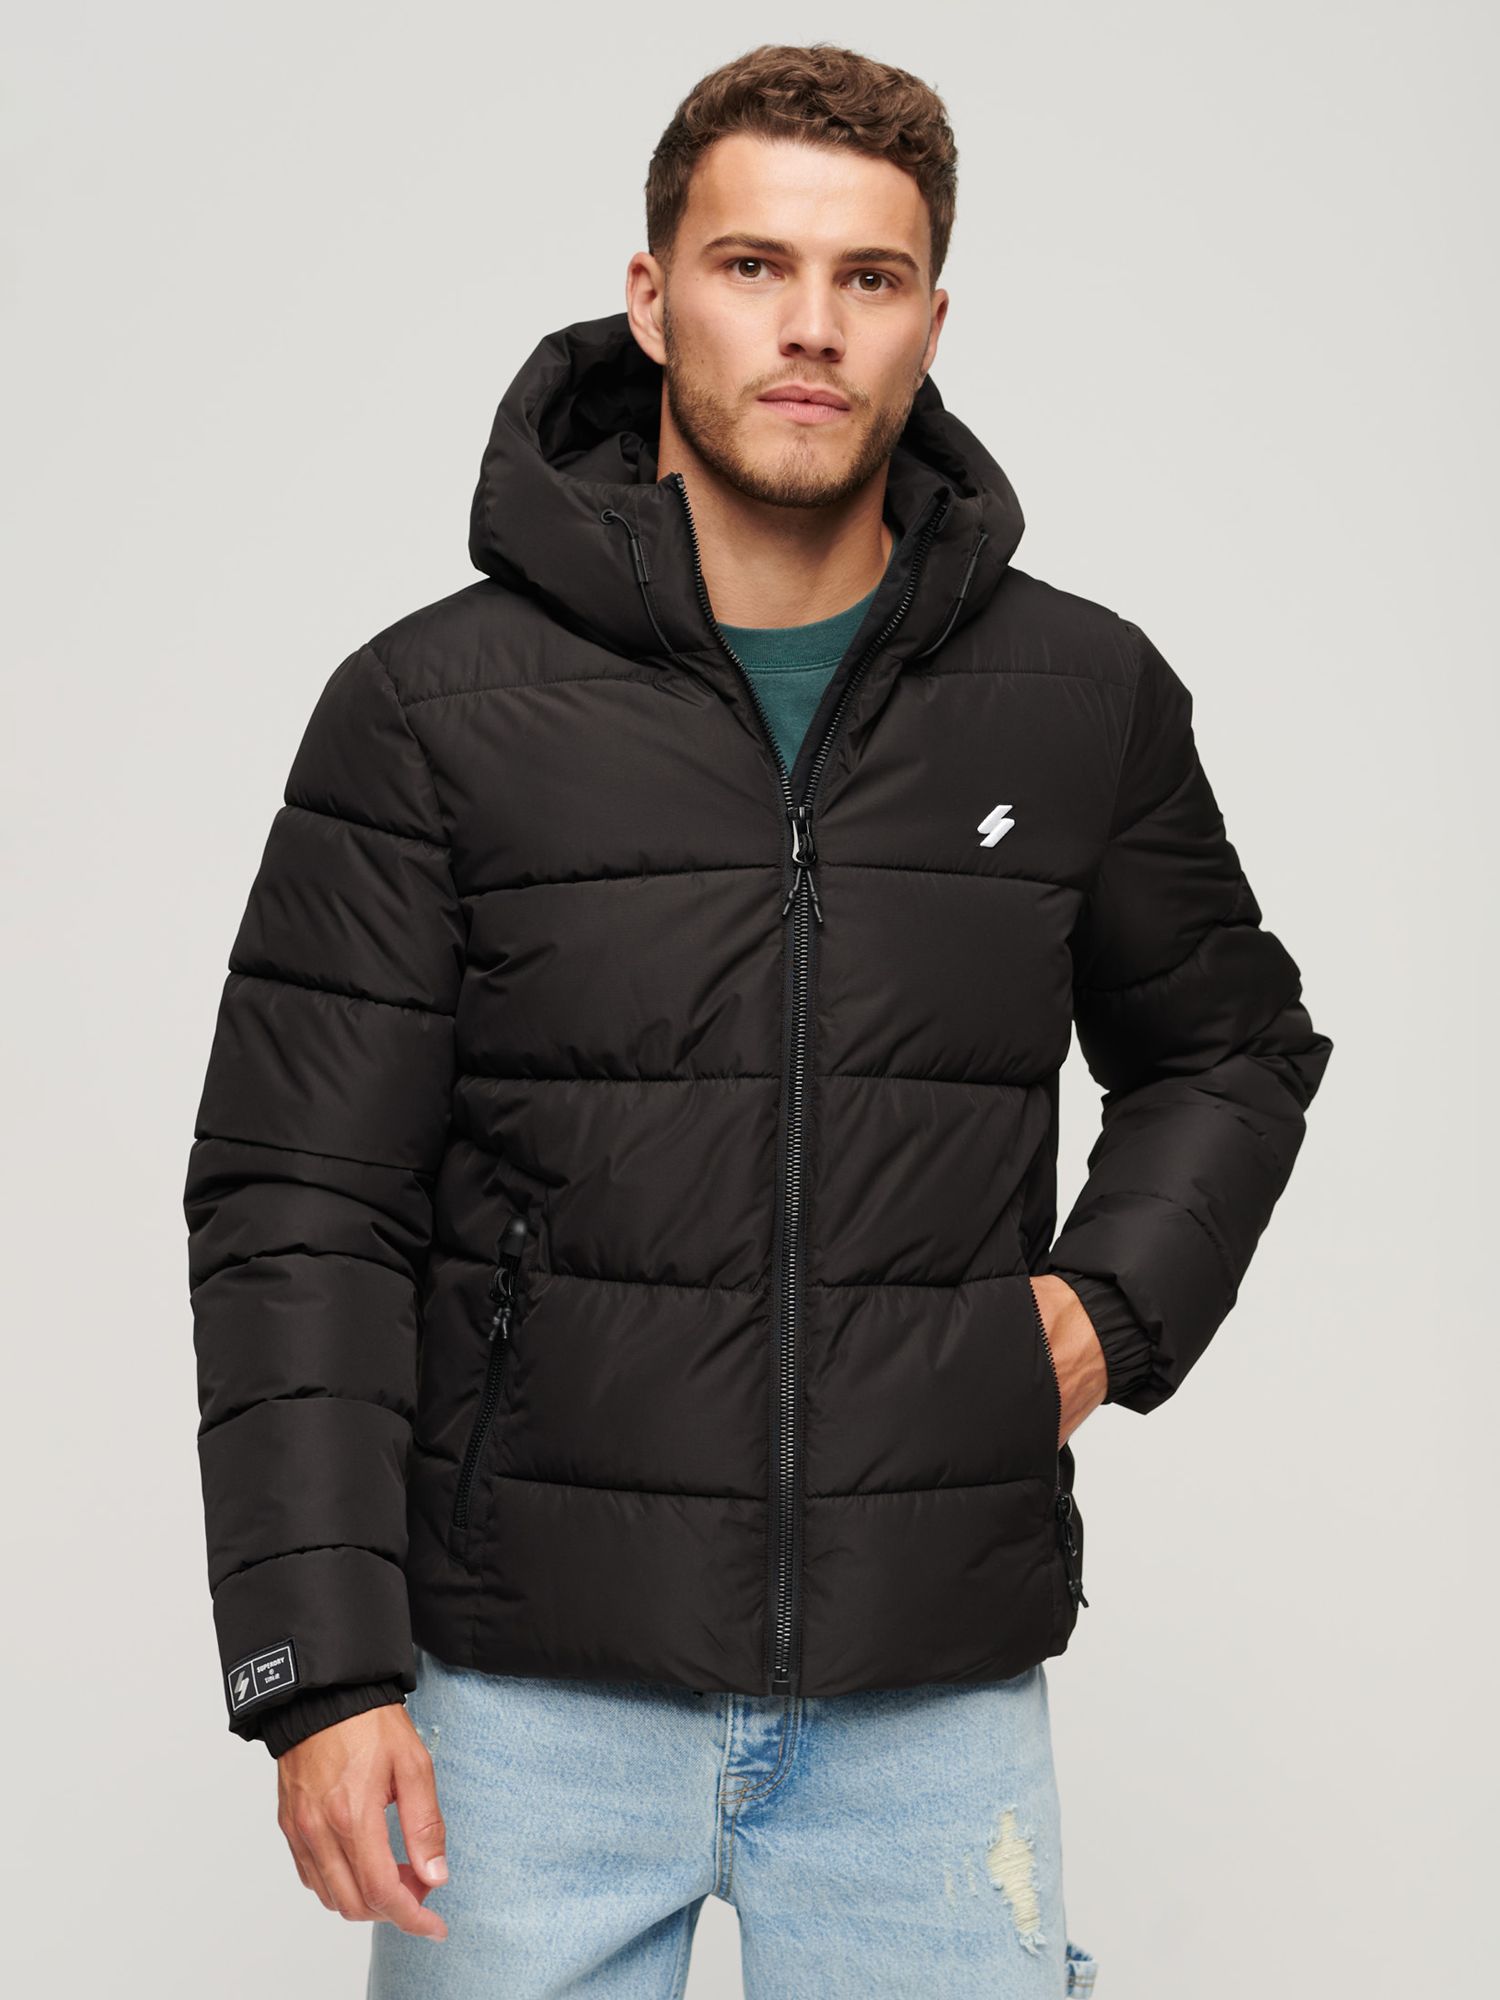 Superdry Hooded Sports Puffer Jacket, Black at John Lewis & Partners